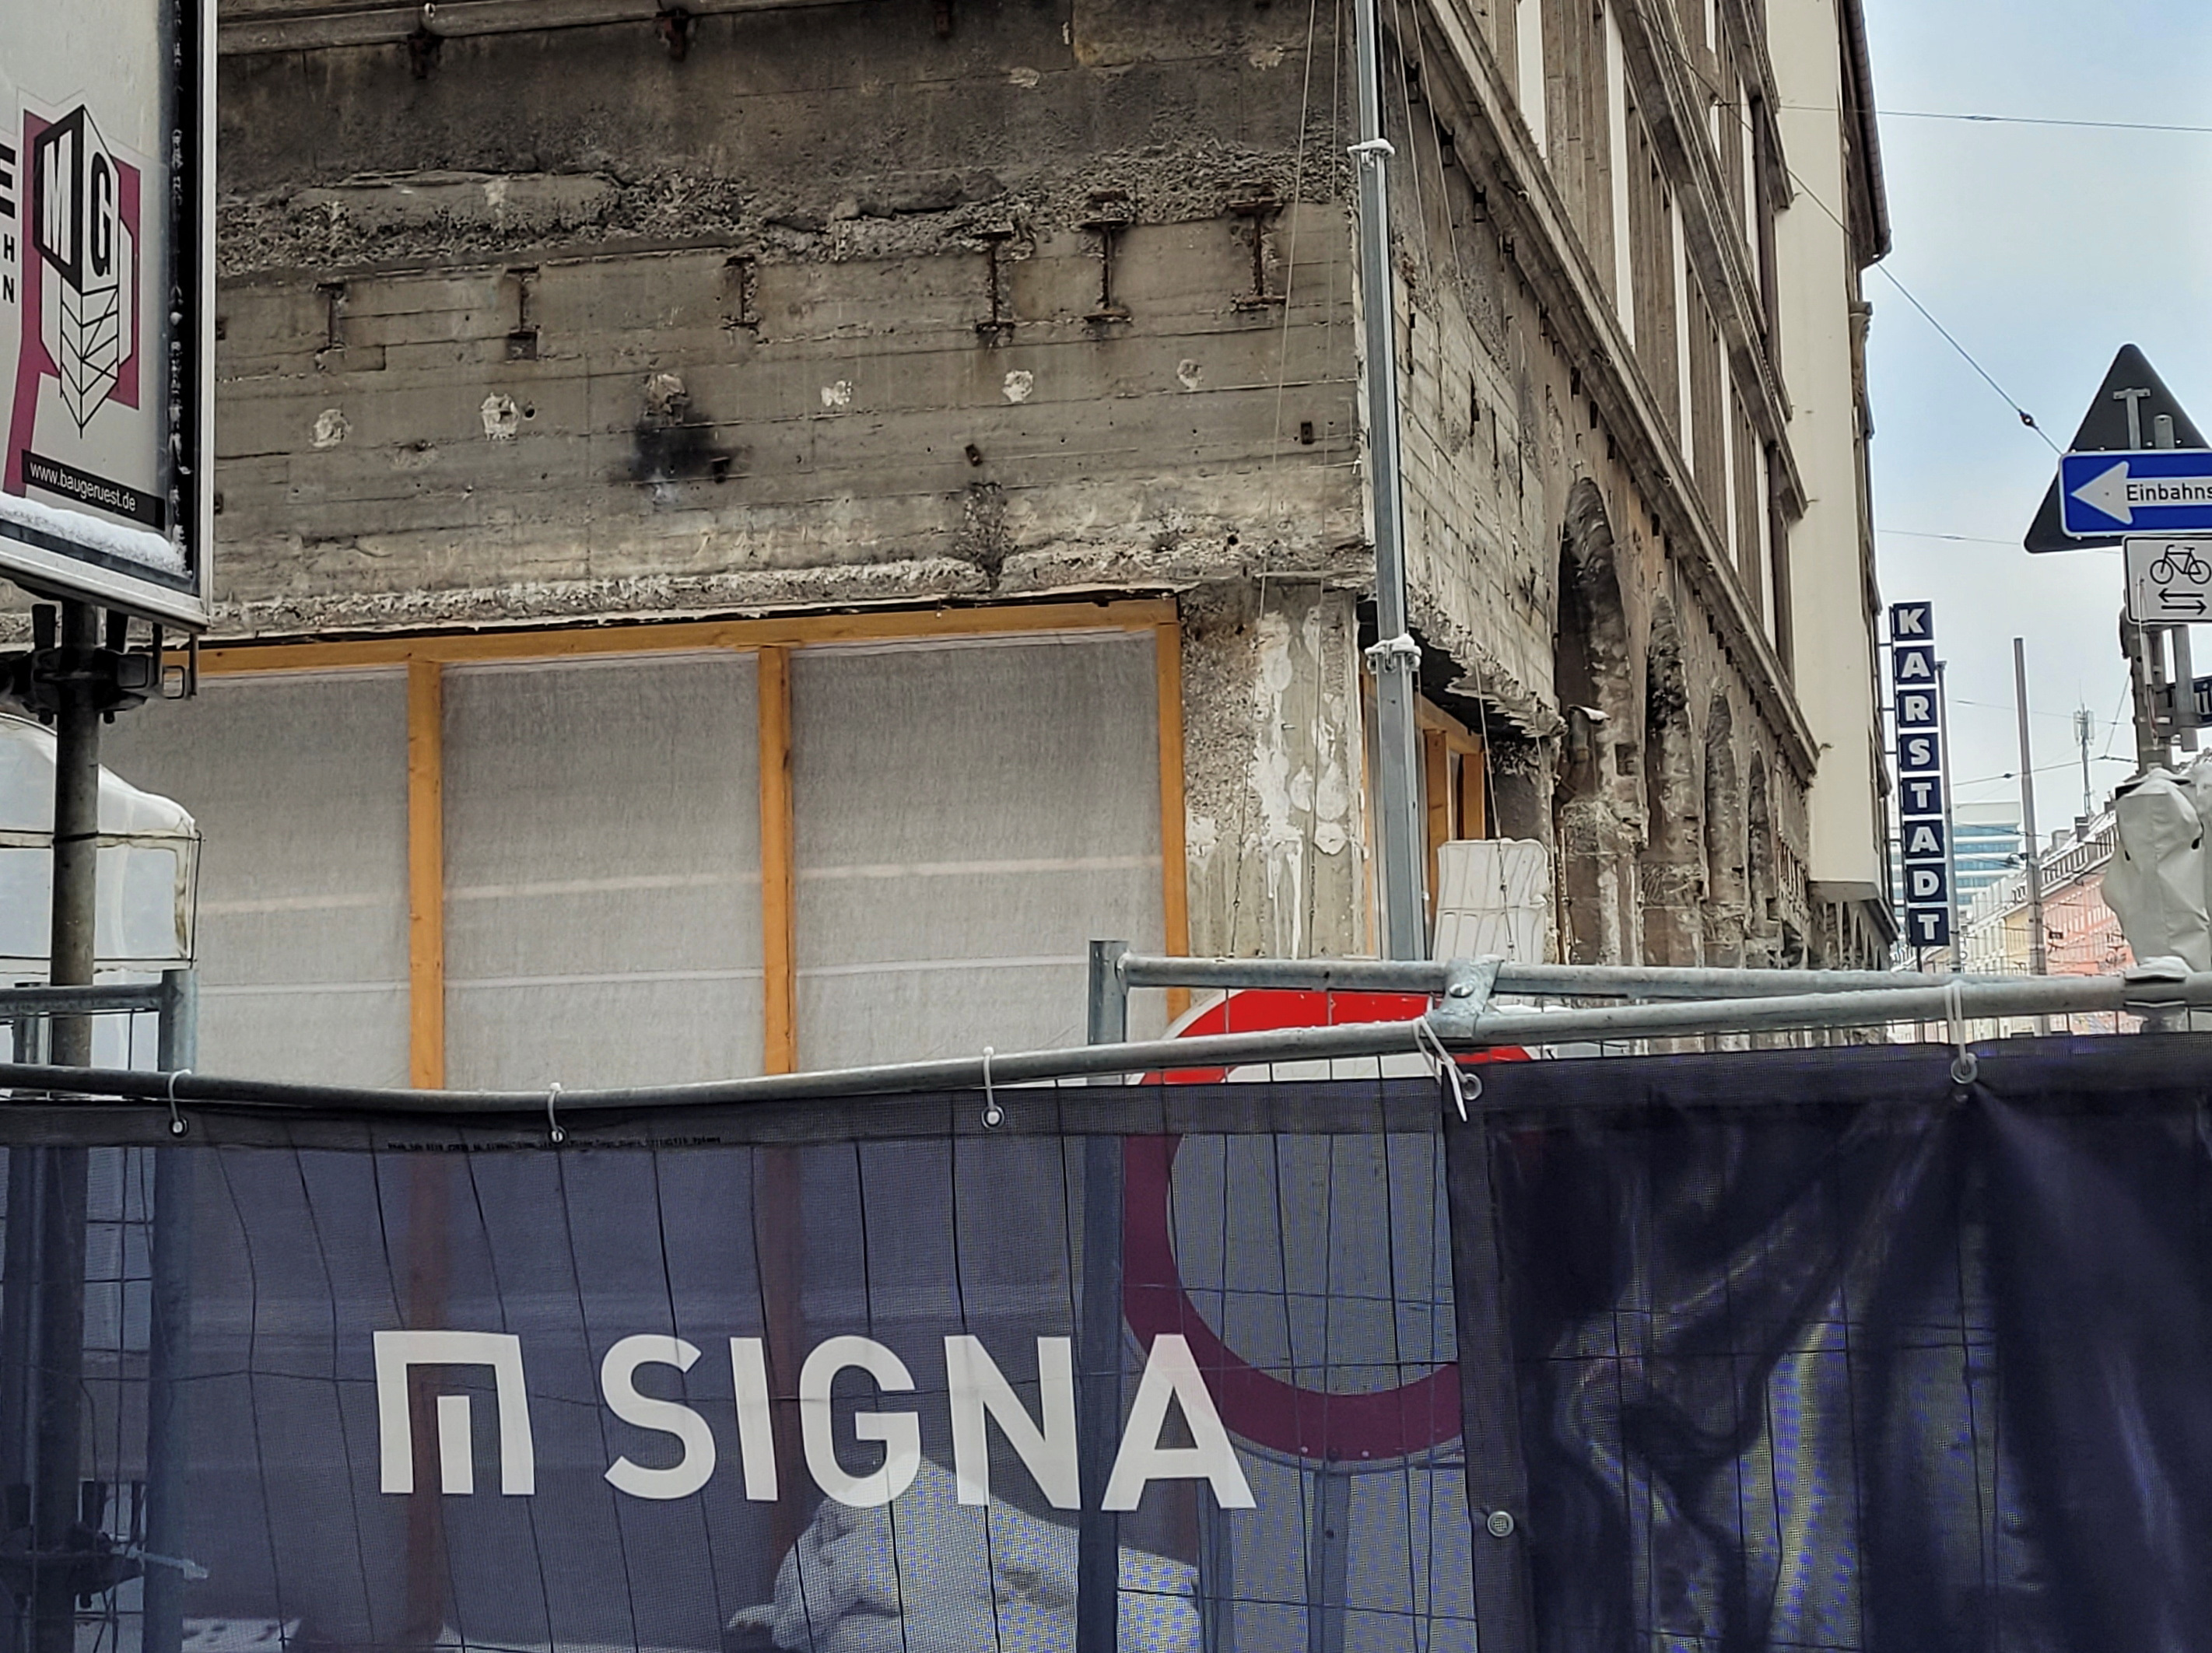 German retail giant Galeria insolvent in wake of Signa collapse